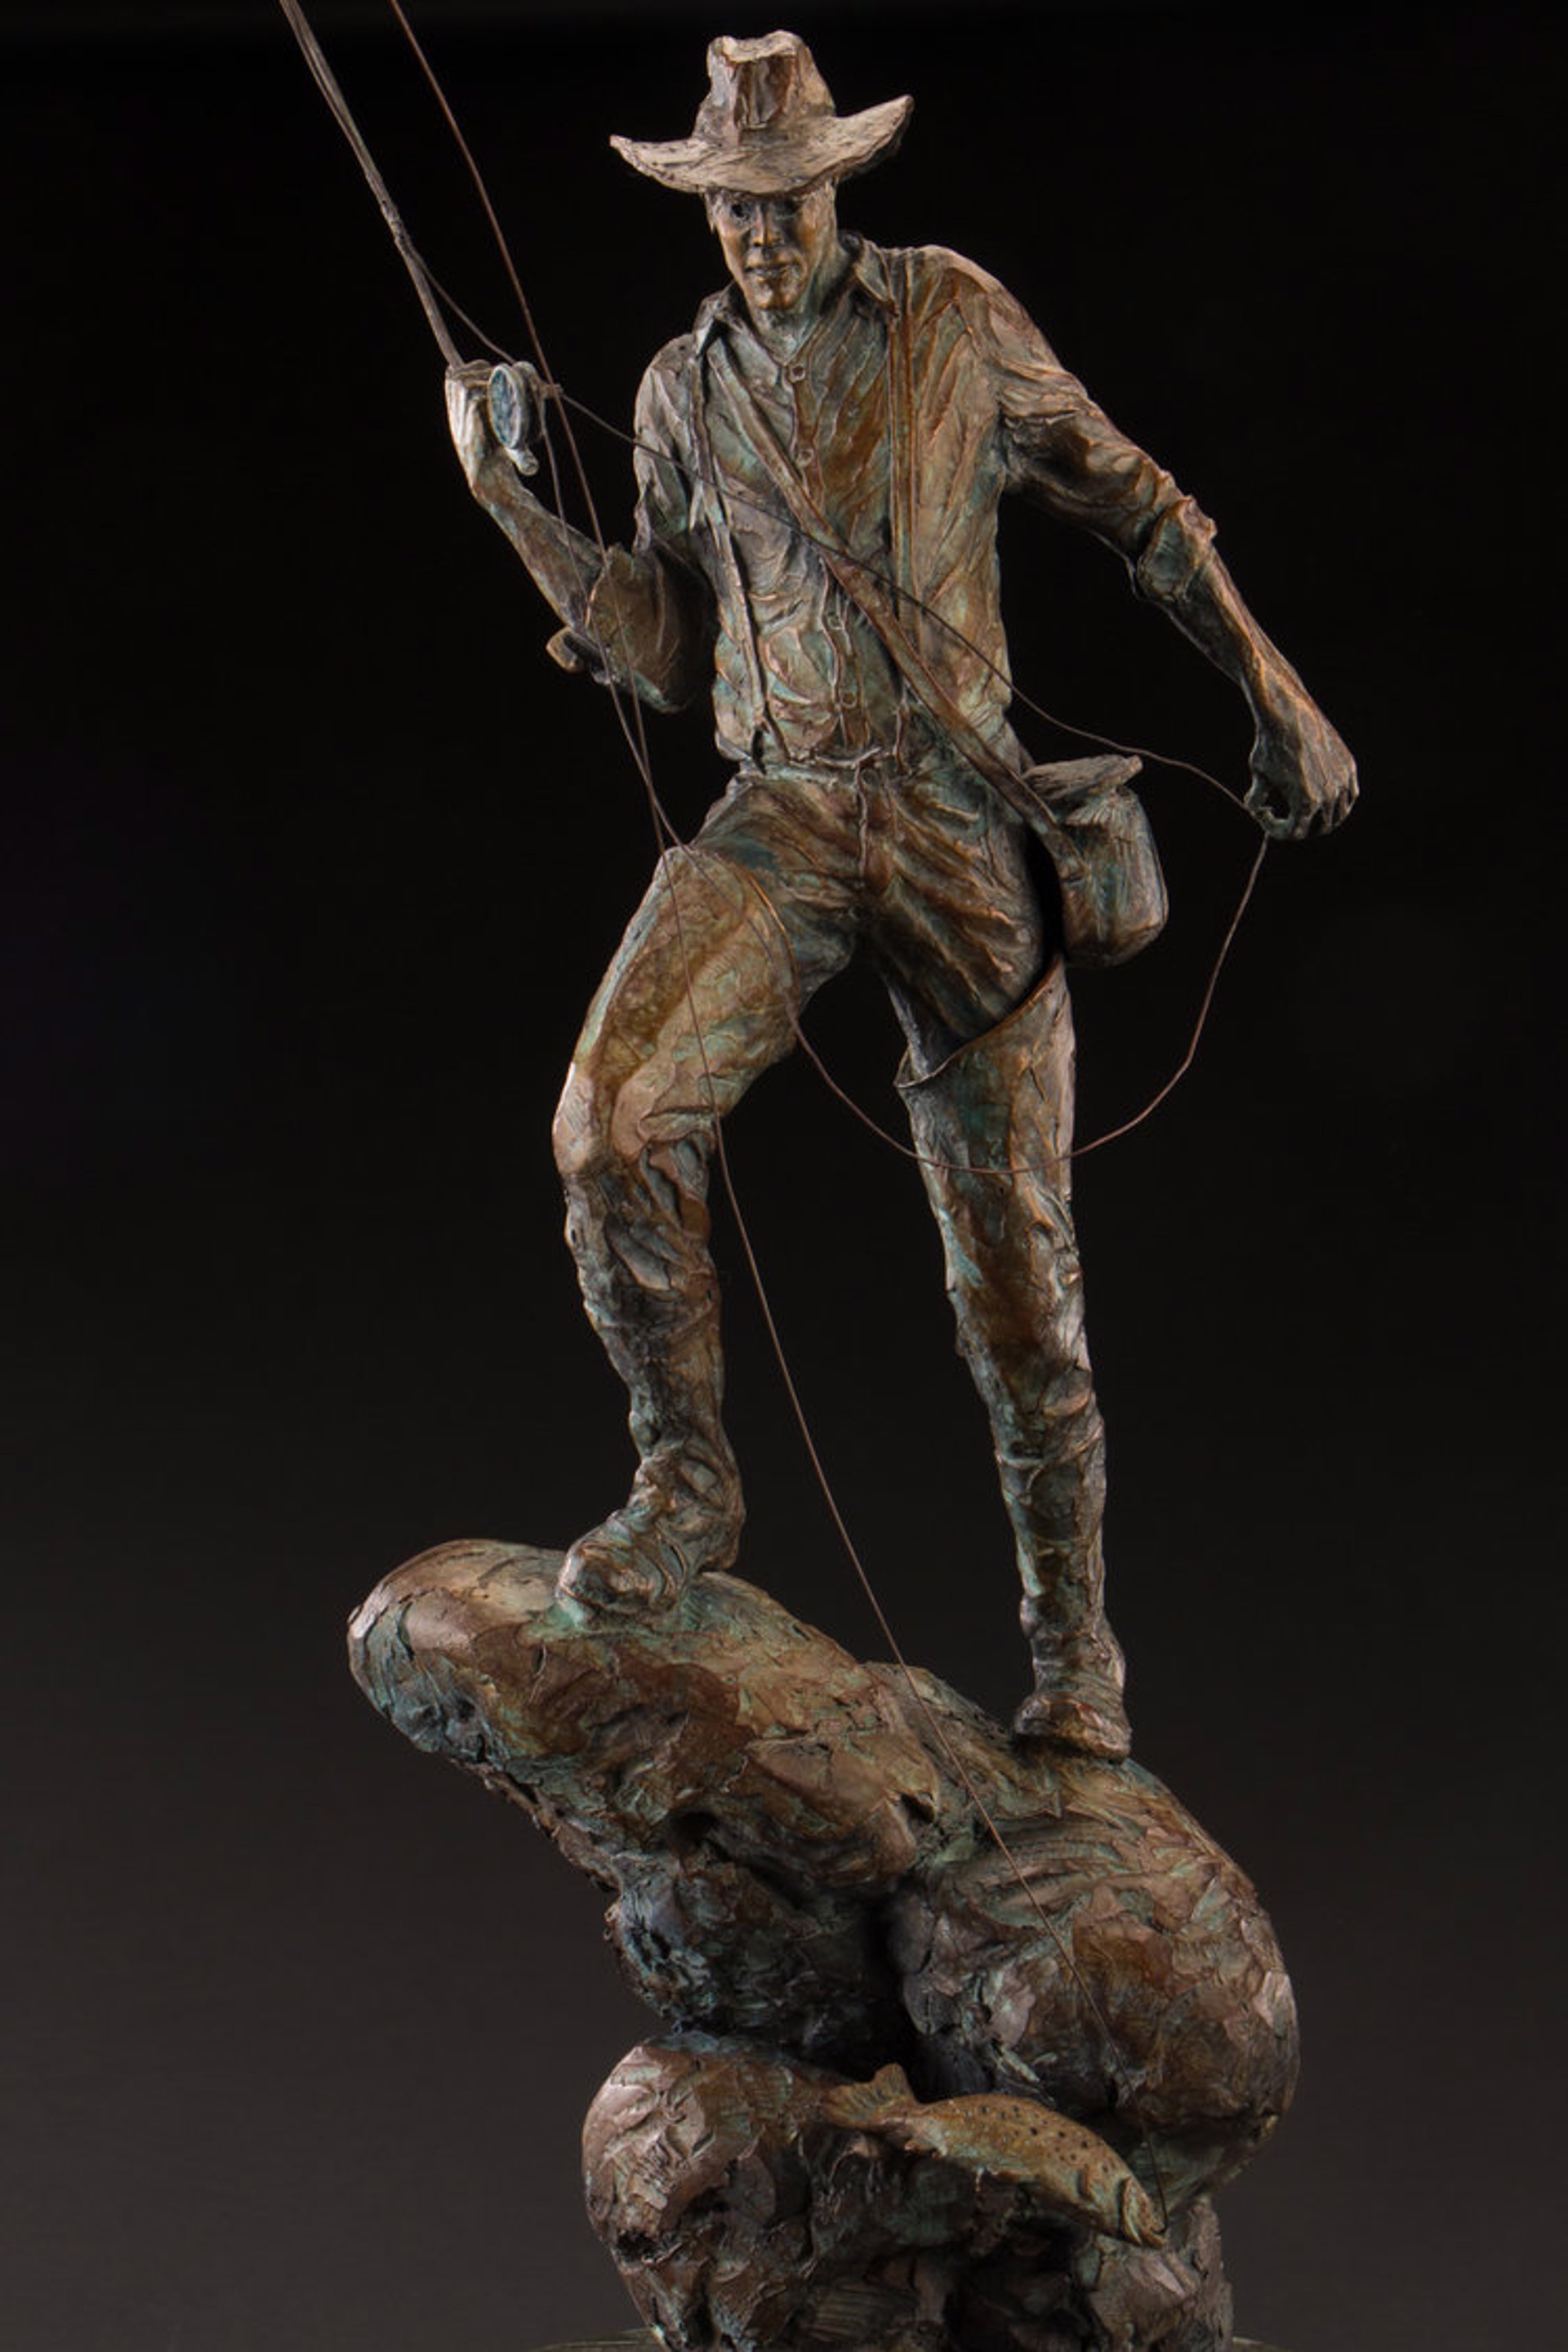 Hooked Maquette (Edition of 35) by Ken Rowe